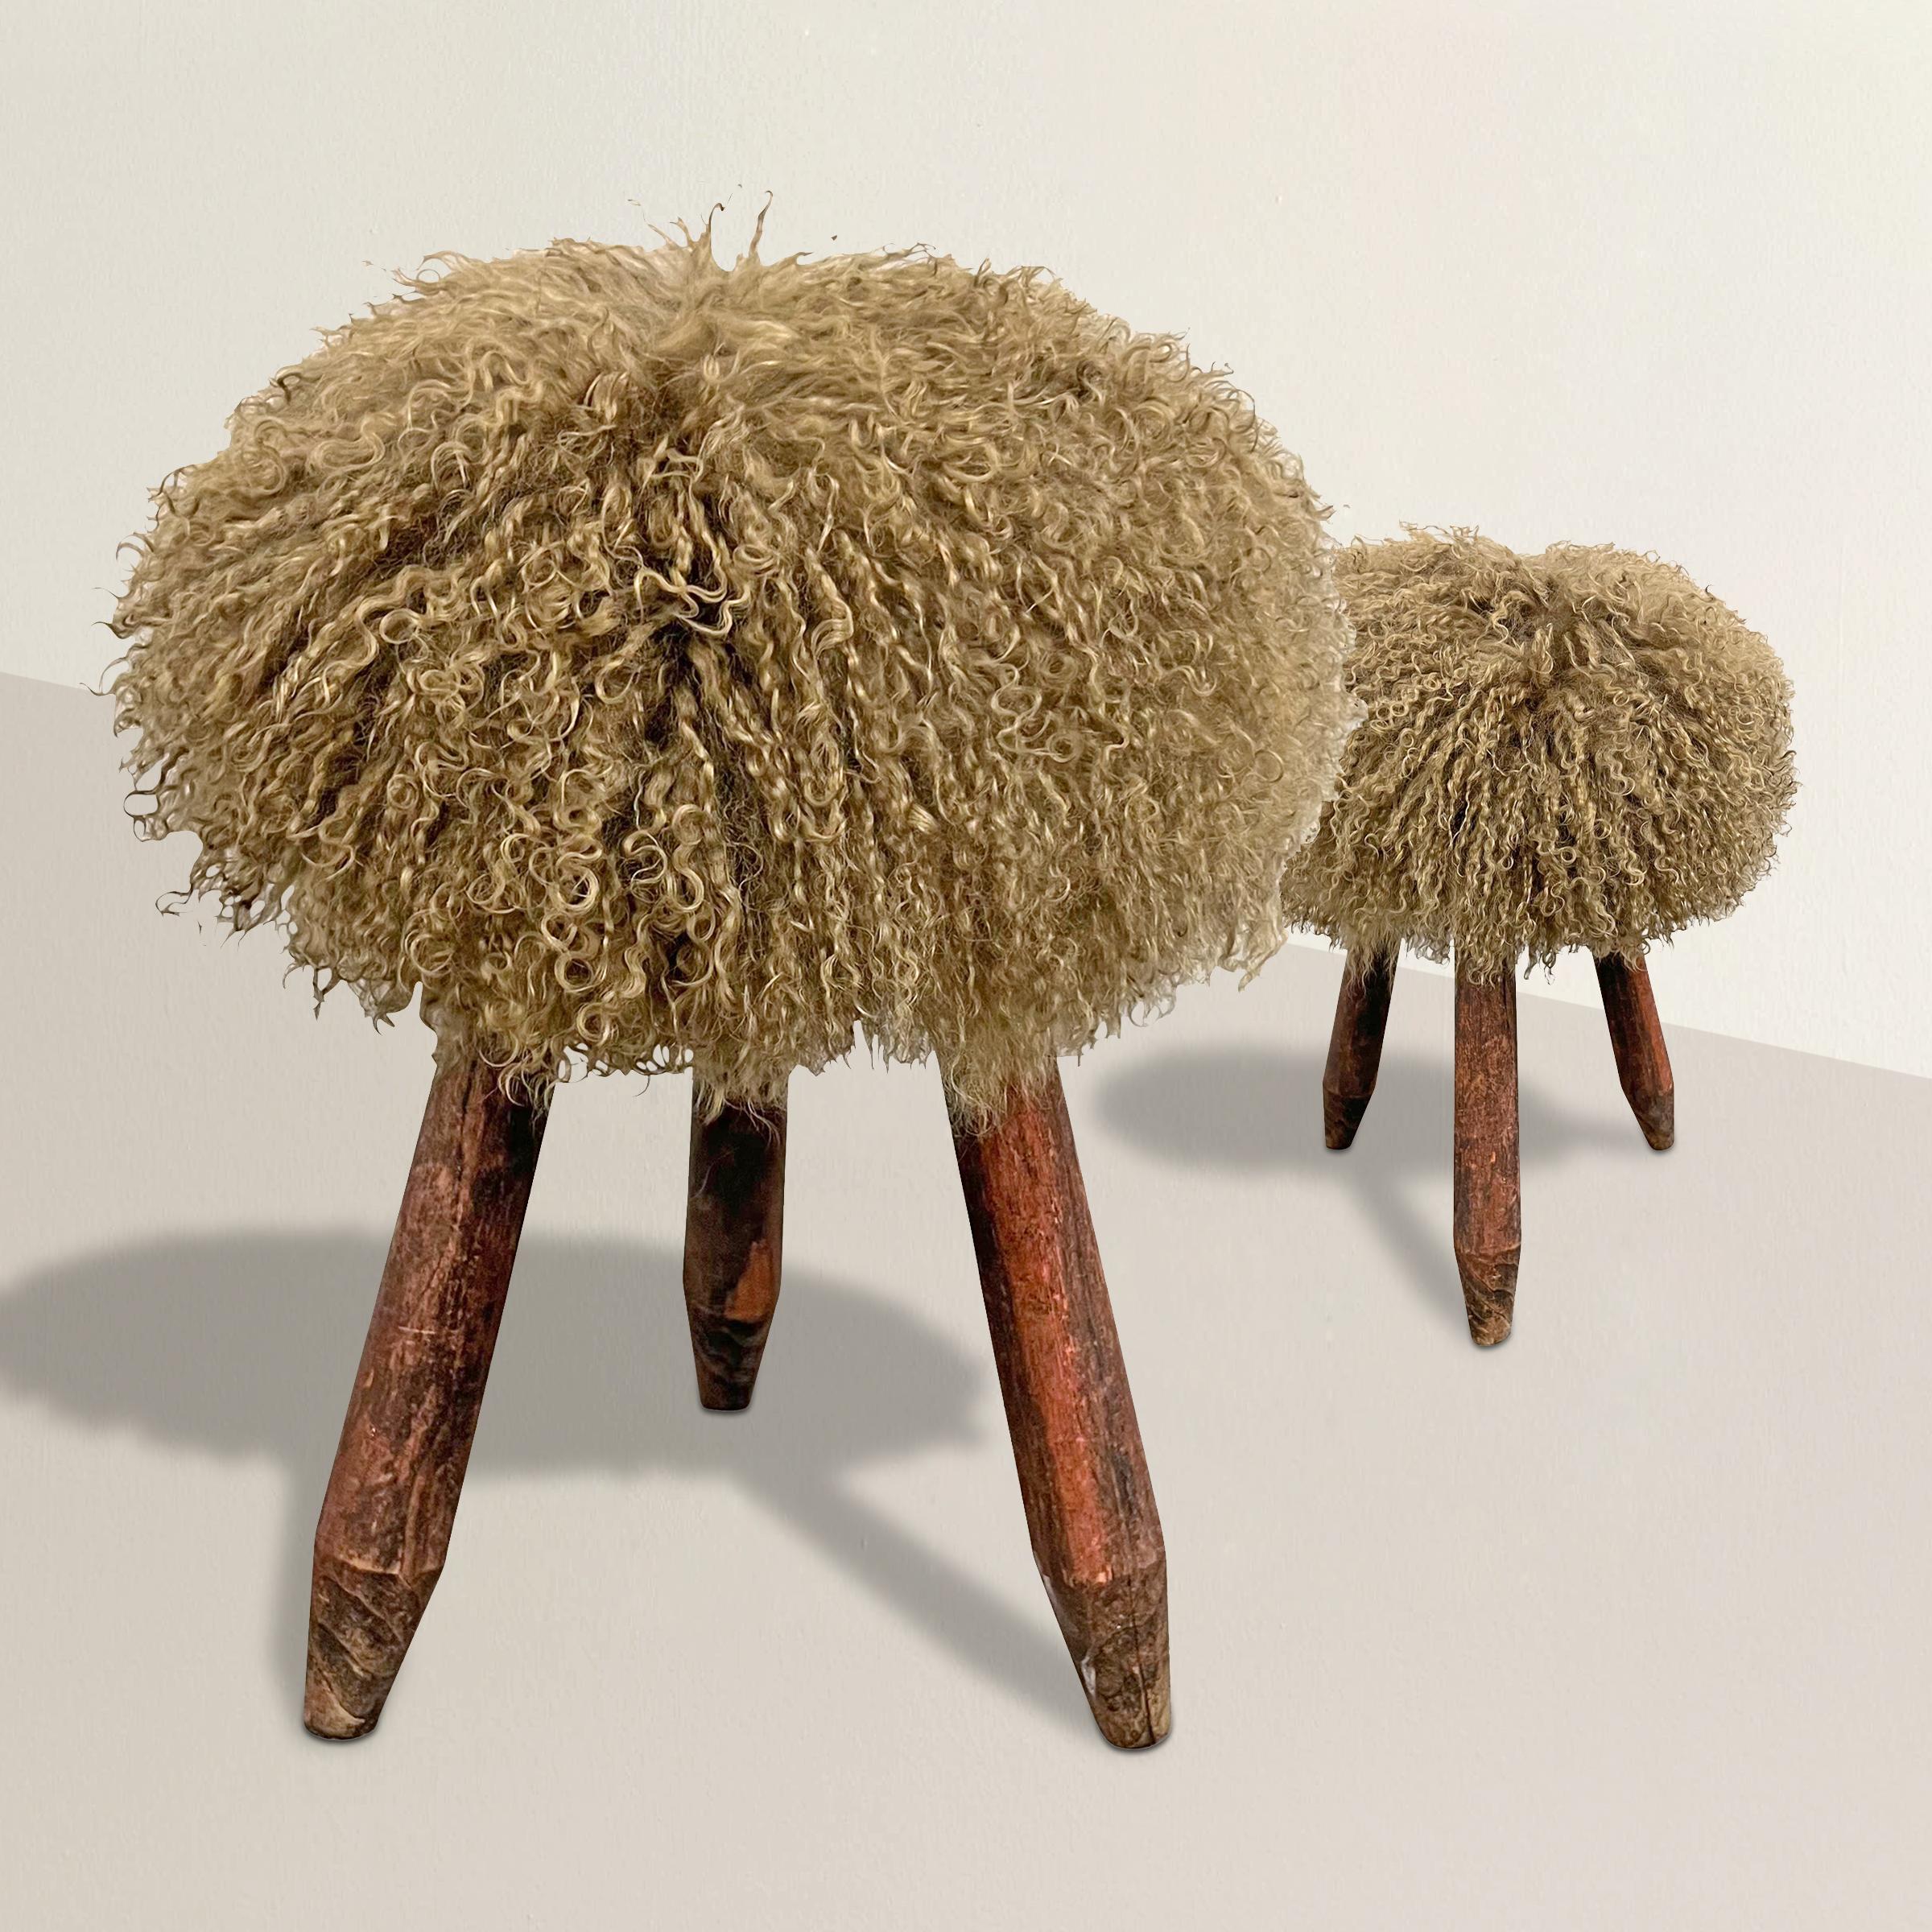 These 1950s French Modernist three-legged stools channels the spirit of design pioneer Charlotte Perriand with their sleek lines and innovative approach. However, they take a contemporary twist with their sumptuous mossy green curly Mongolian sheep